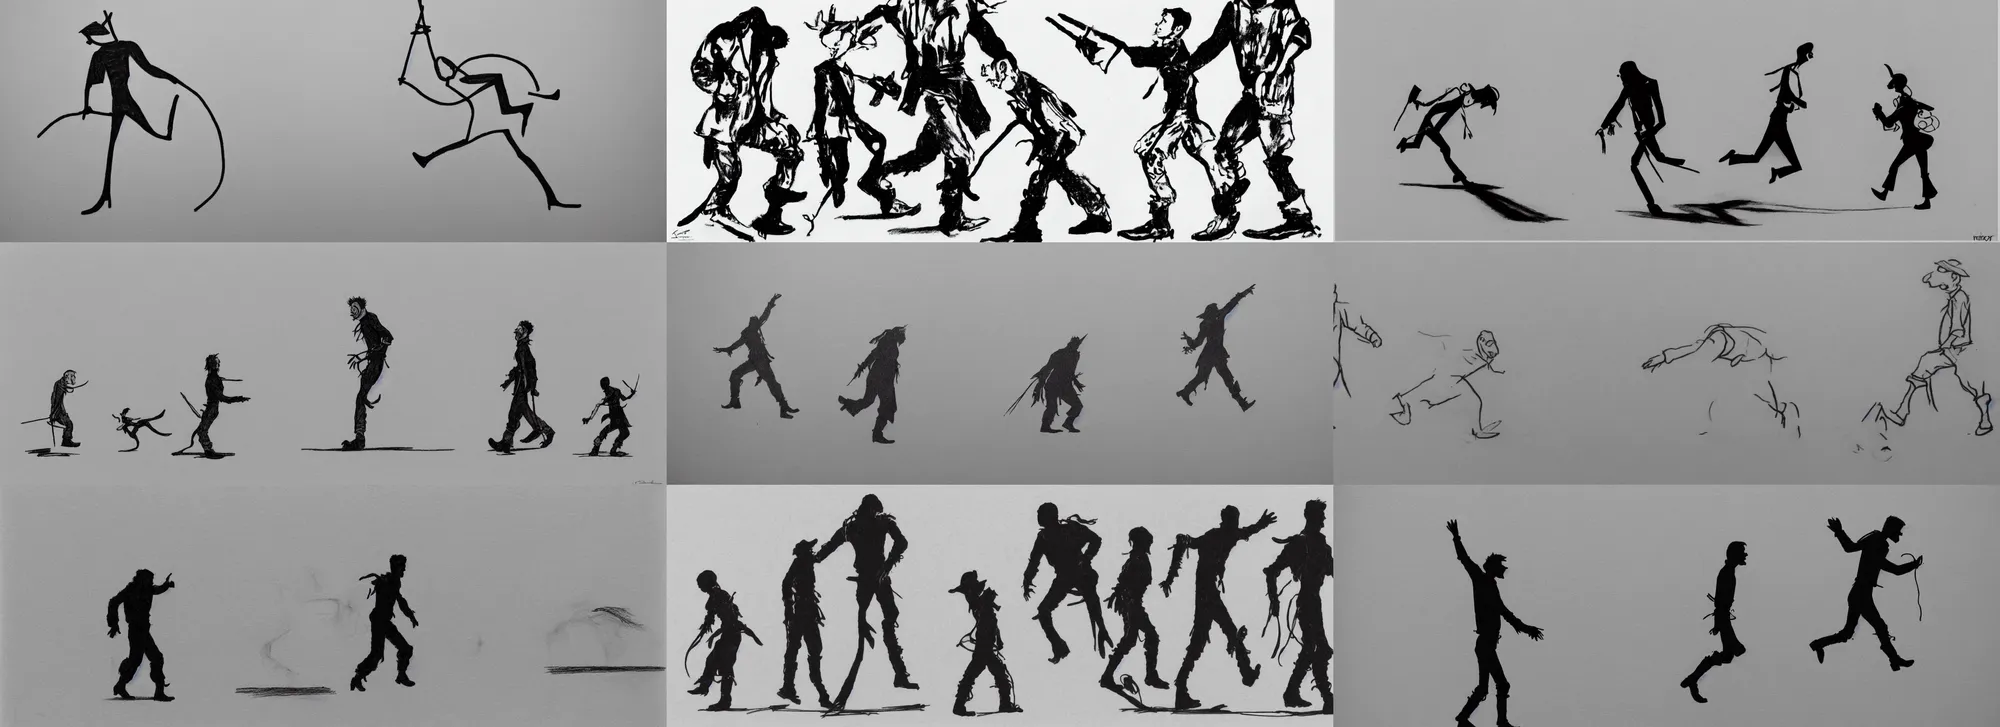 Prompt: mad max being very goofy and funny in monty pythons ministry of silly walks, very light and soft pencil drawing of silhouettes walking silly by james jean, minimalist line drawing on white background, very silly, very minimalist, very light, very soft